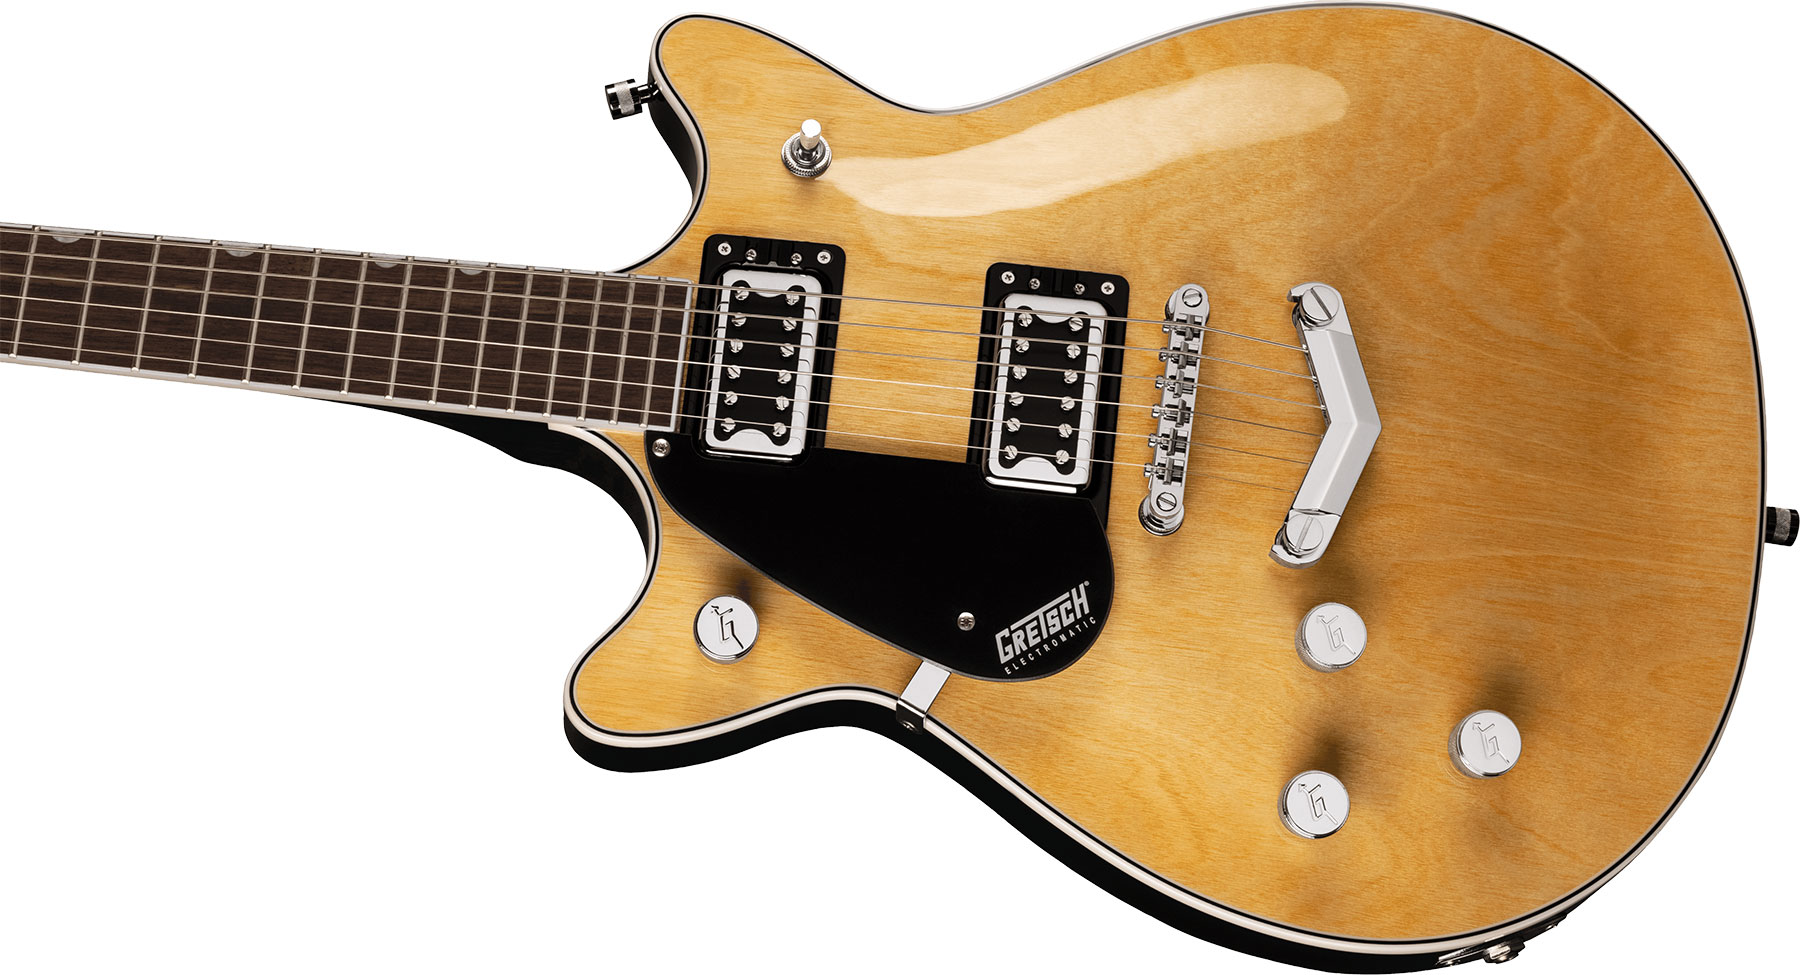 Gretsch G5222lh Electromatic Double Jet Bt V-stoptail Gaucher Hh Ht Lau - Natural - Left-handed electric guitar - Variation 2